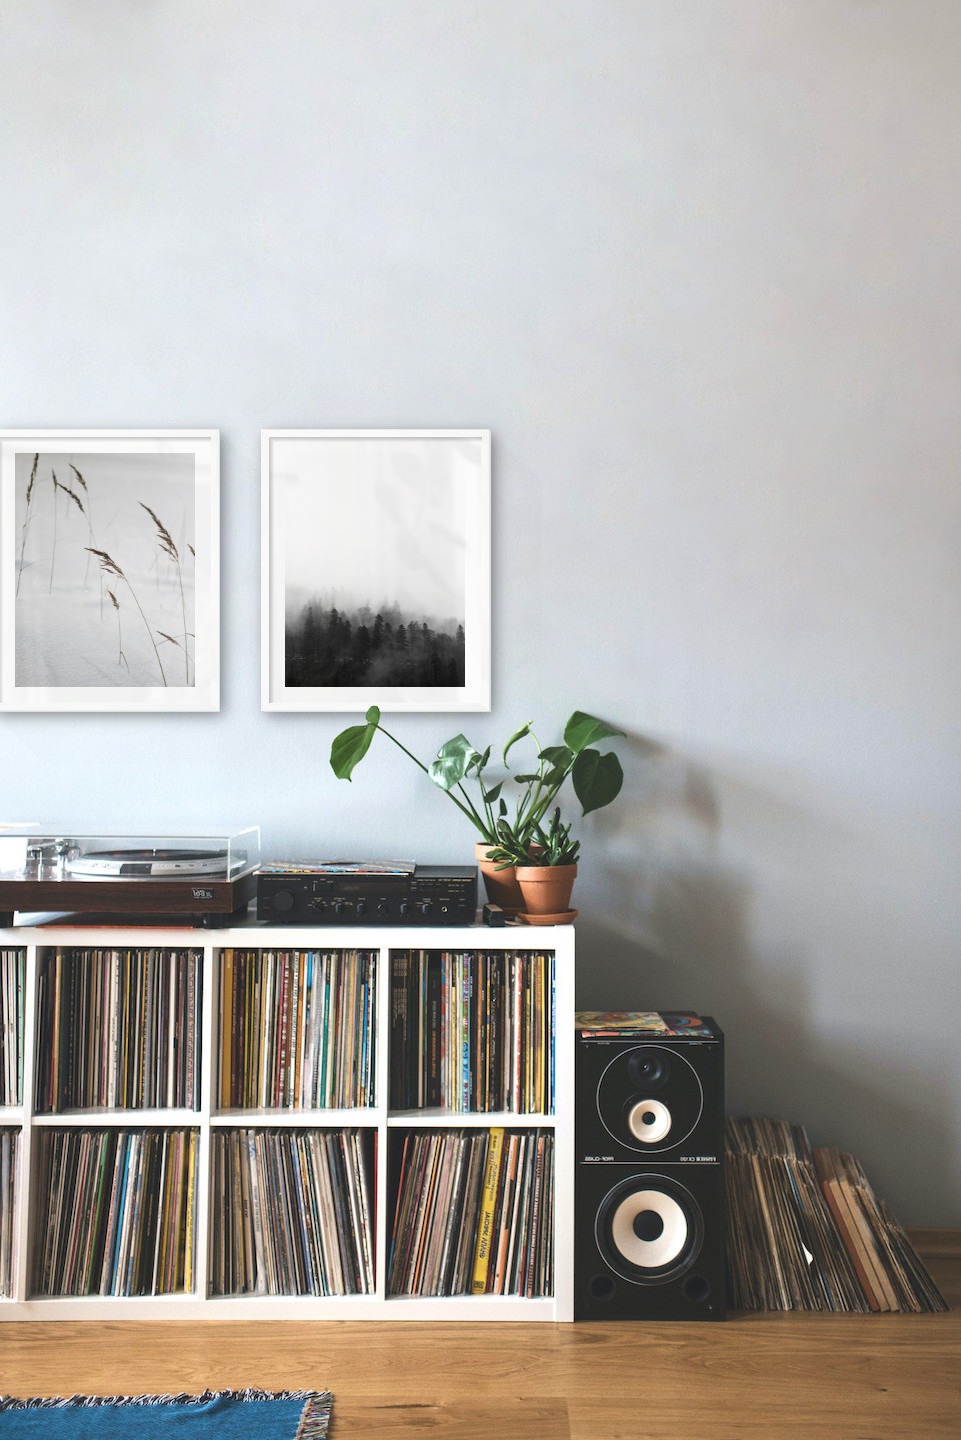 Gallery wall with picture frames in white in sizes 40x50 with prints "Sharp in the snow" and "Foggy wooden tops"